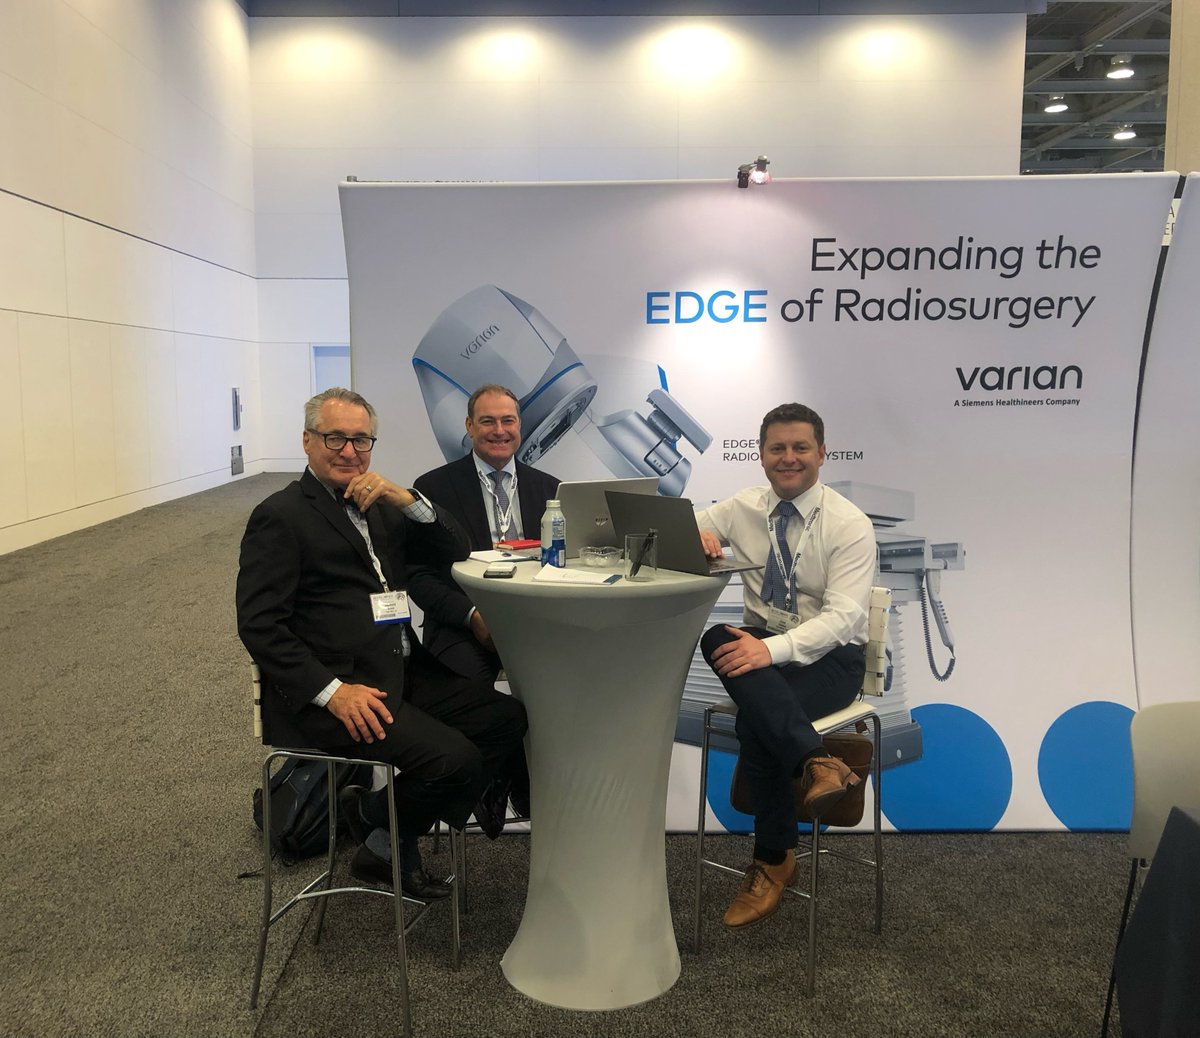 Dr. Evan Thomas & Dr. Pantaleo “Leo” Romanelli are on the ground with us at #CNS2022 sharing more about the latest clinical applications of radiosurgery. Come stop by tomorrow and meet these experts, along with our team, at booth #600!